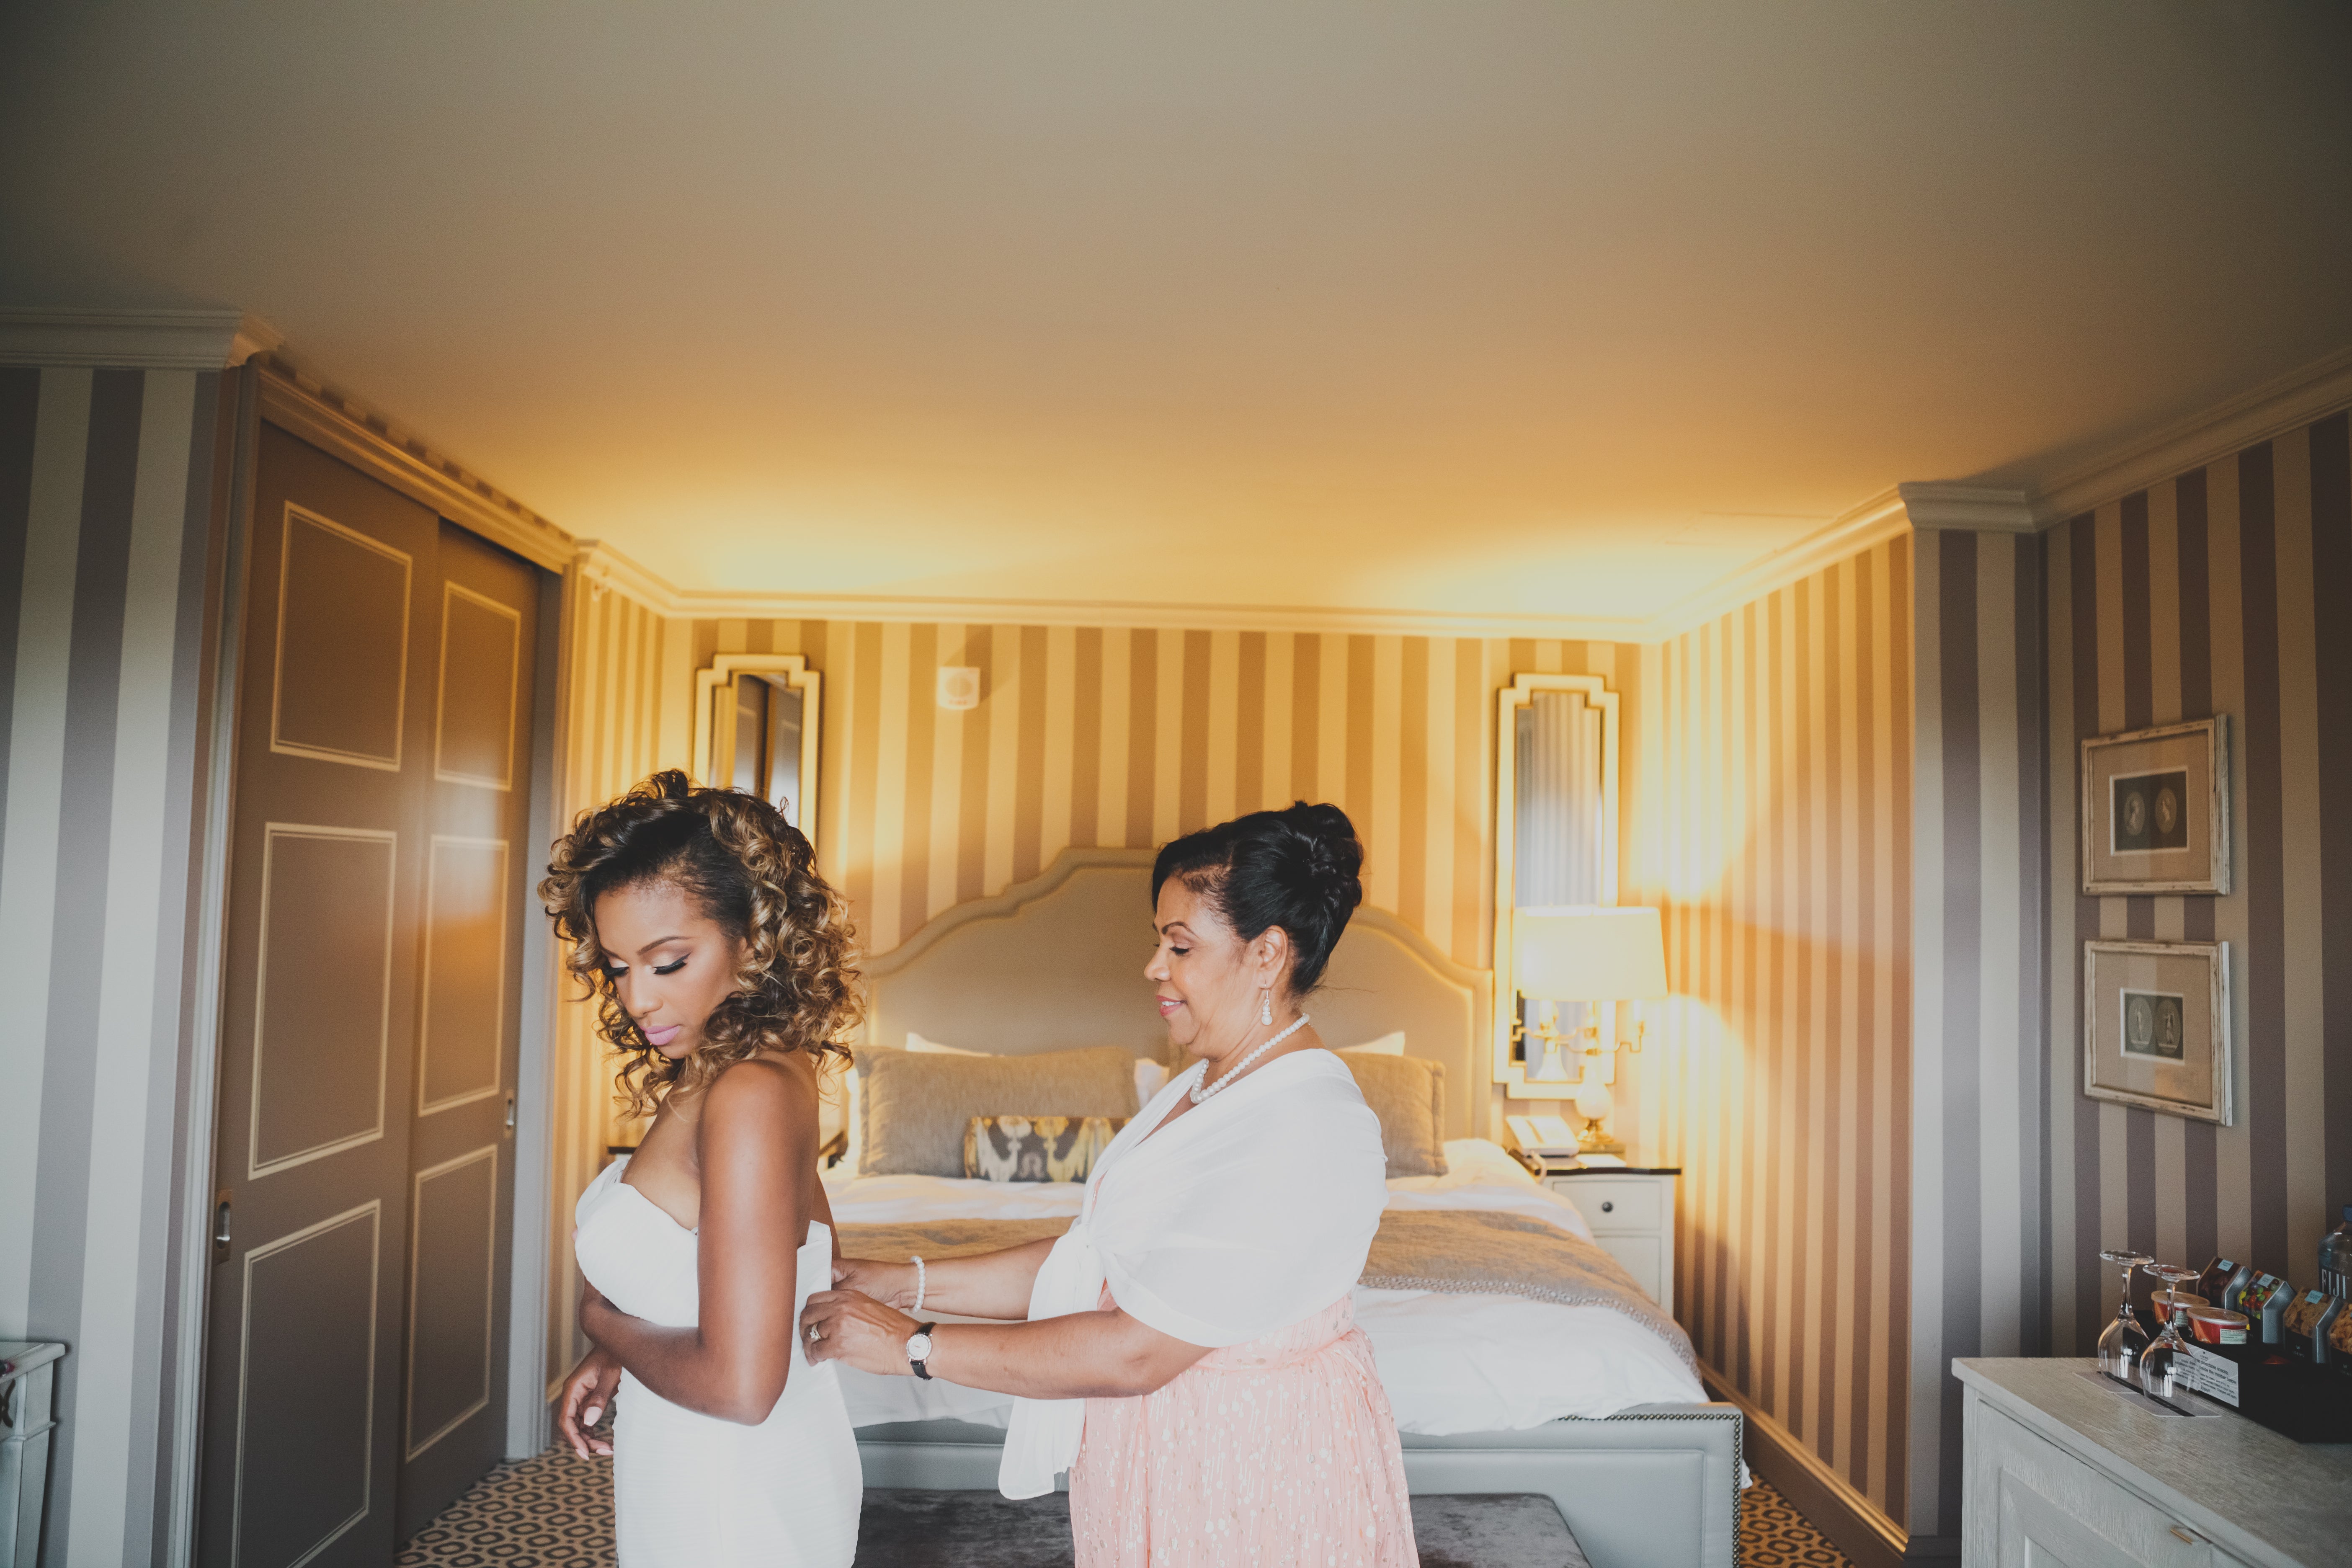 Bridal Bliss: Robert and Jeanette's Modern D.C. Wedding Was Stunning
